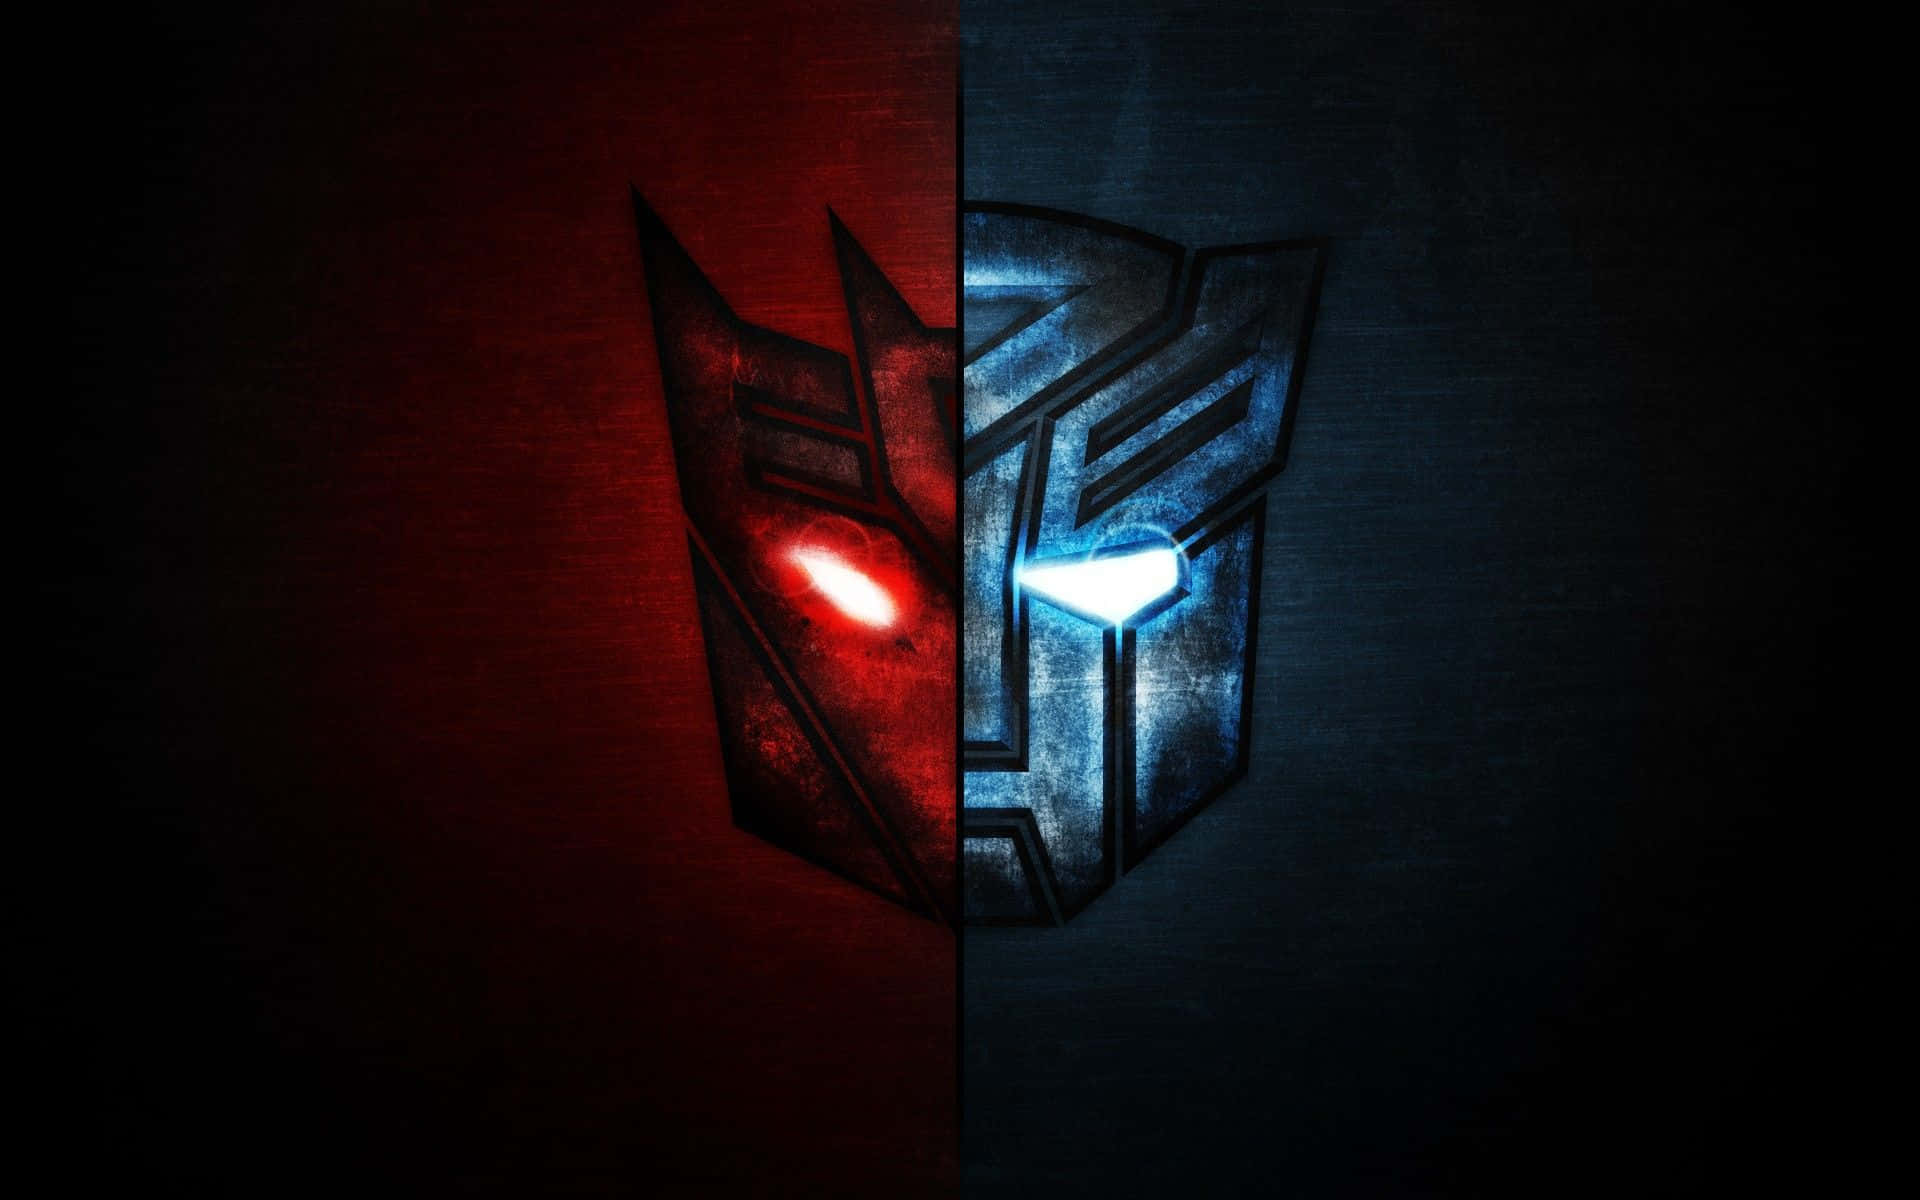 Battle of the transformers